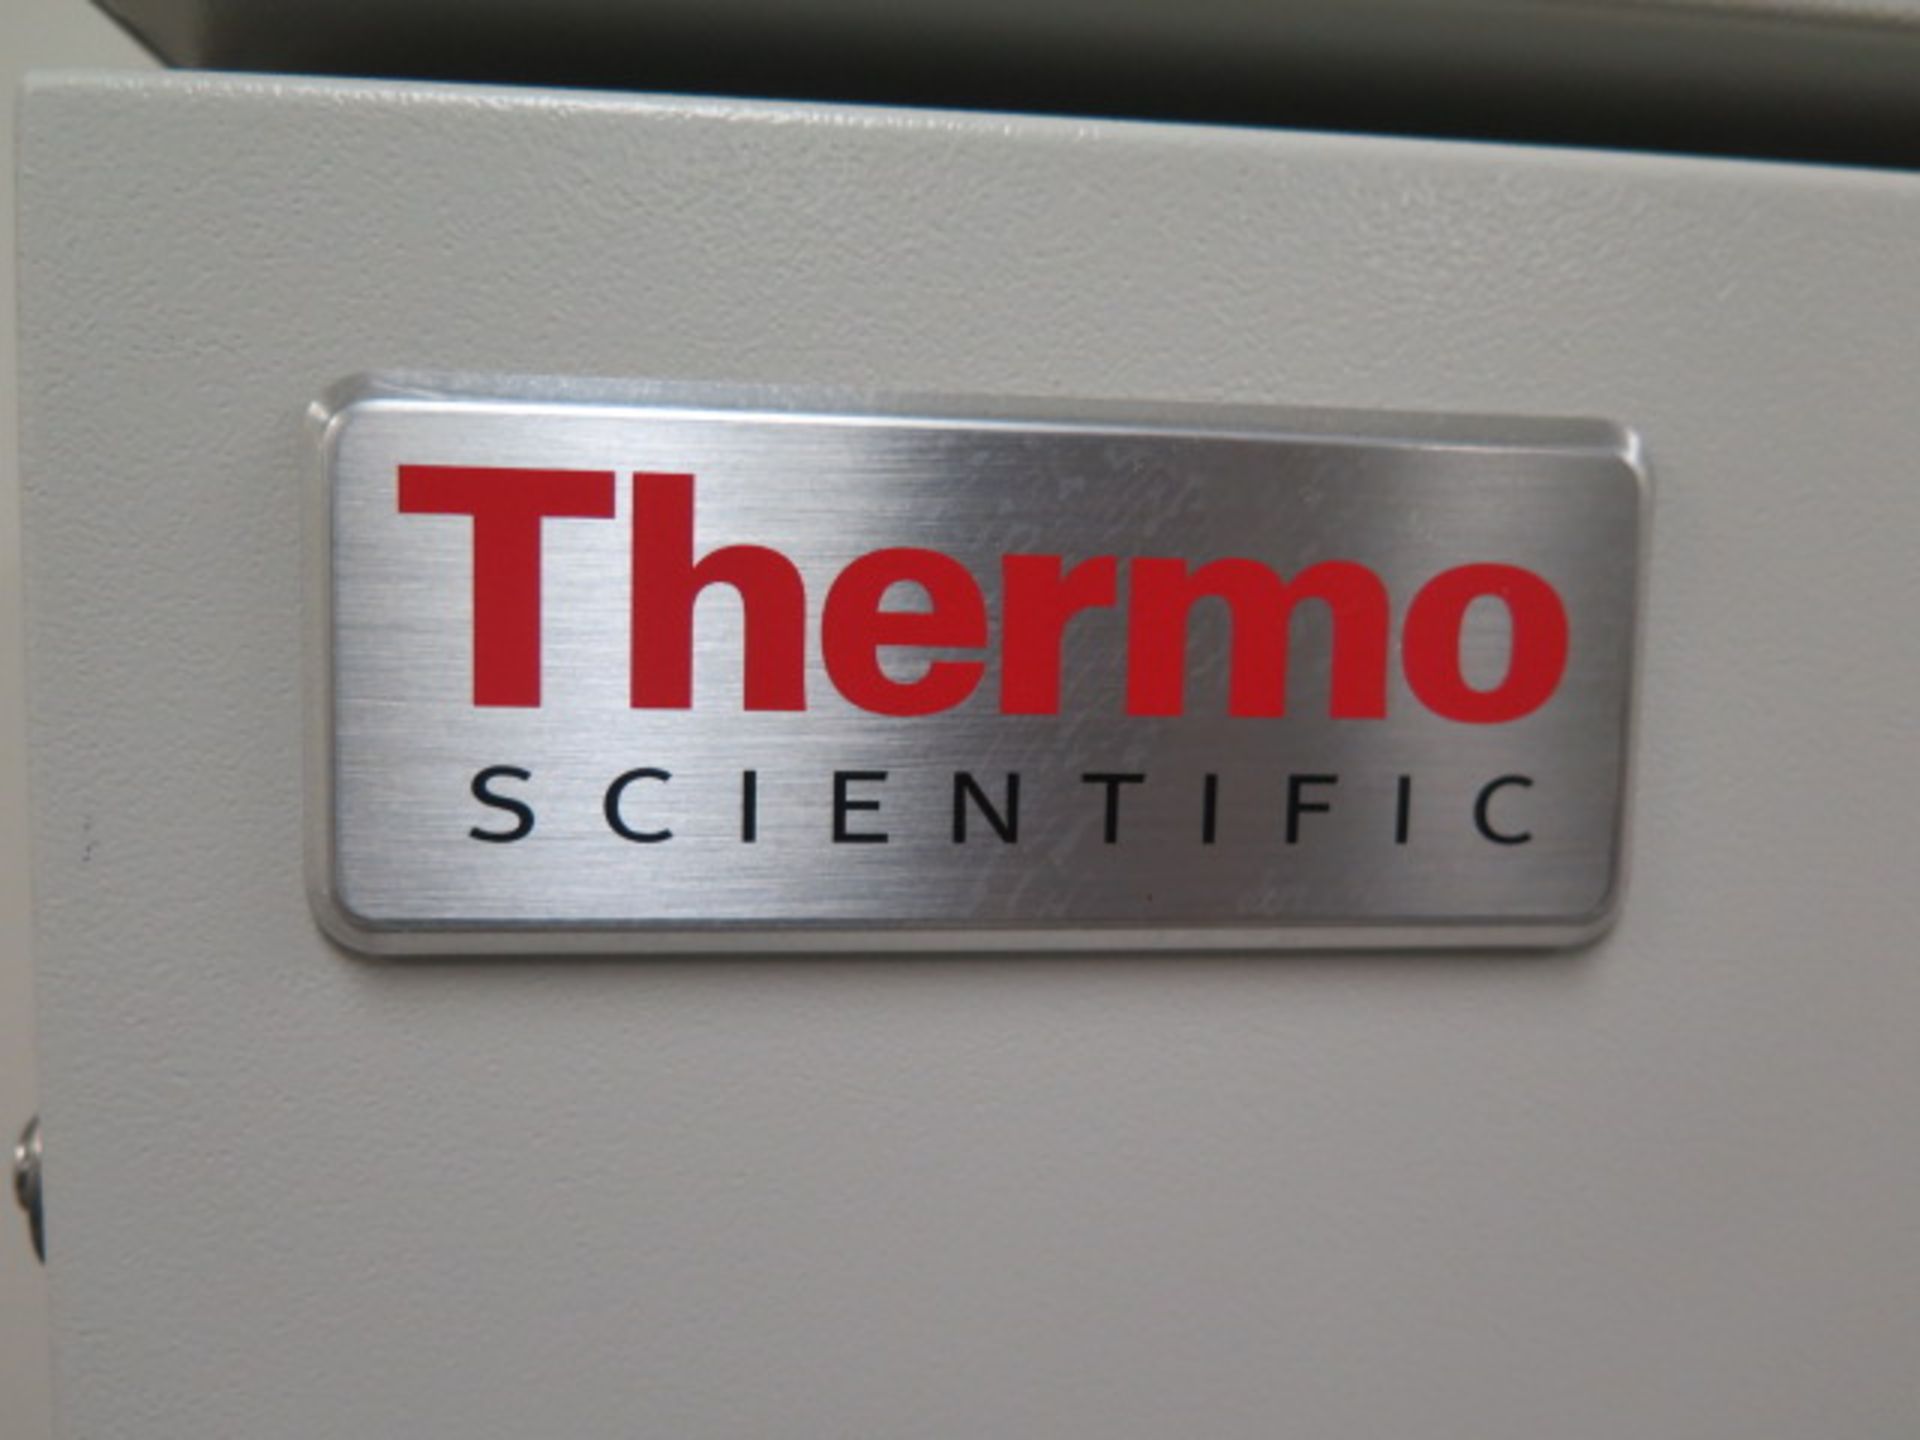 Thermo Scientifis mdl. 6878 Lab Oven s/n 612299-130 w/ Digital Temp Controller. SOLD AS IS - Image 5 of 5